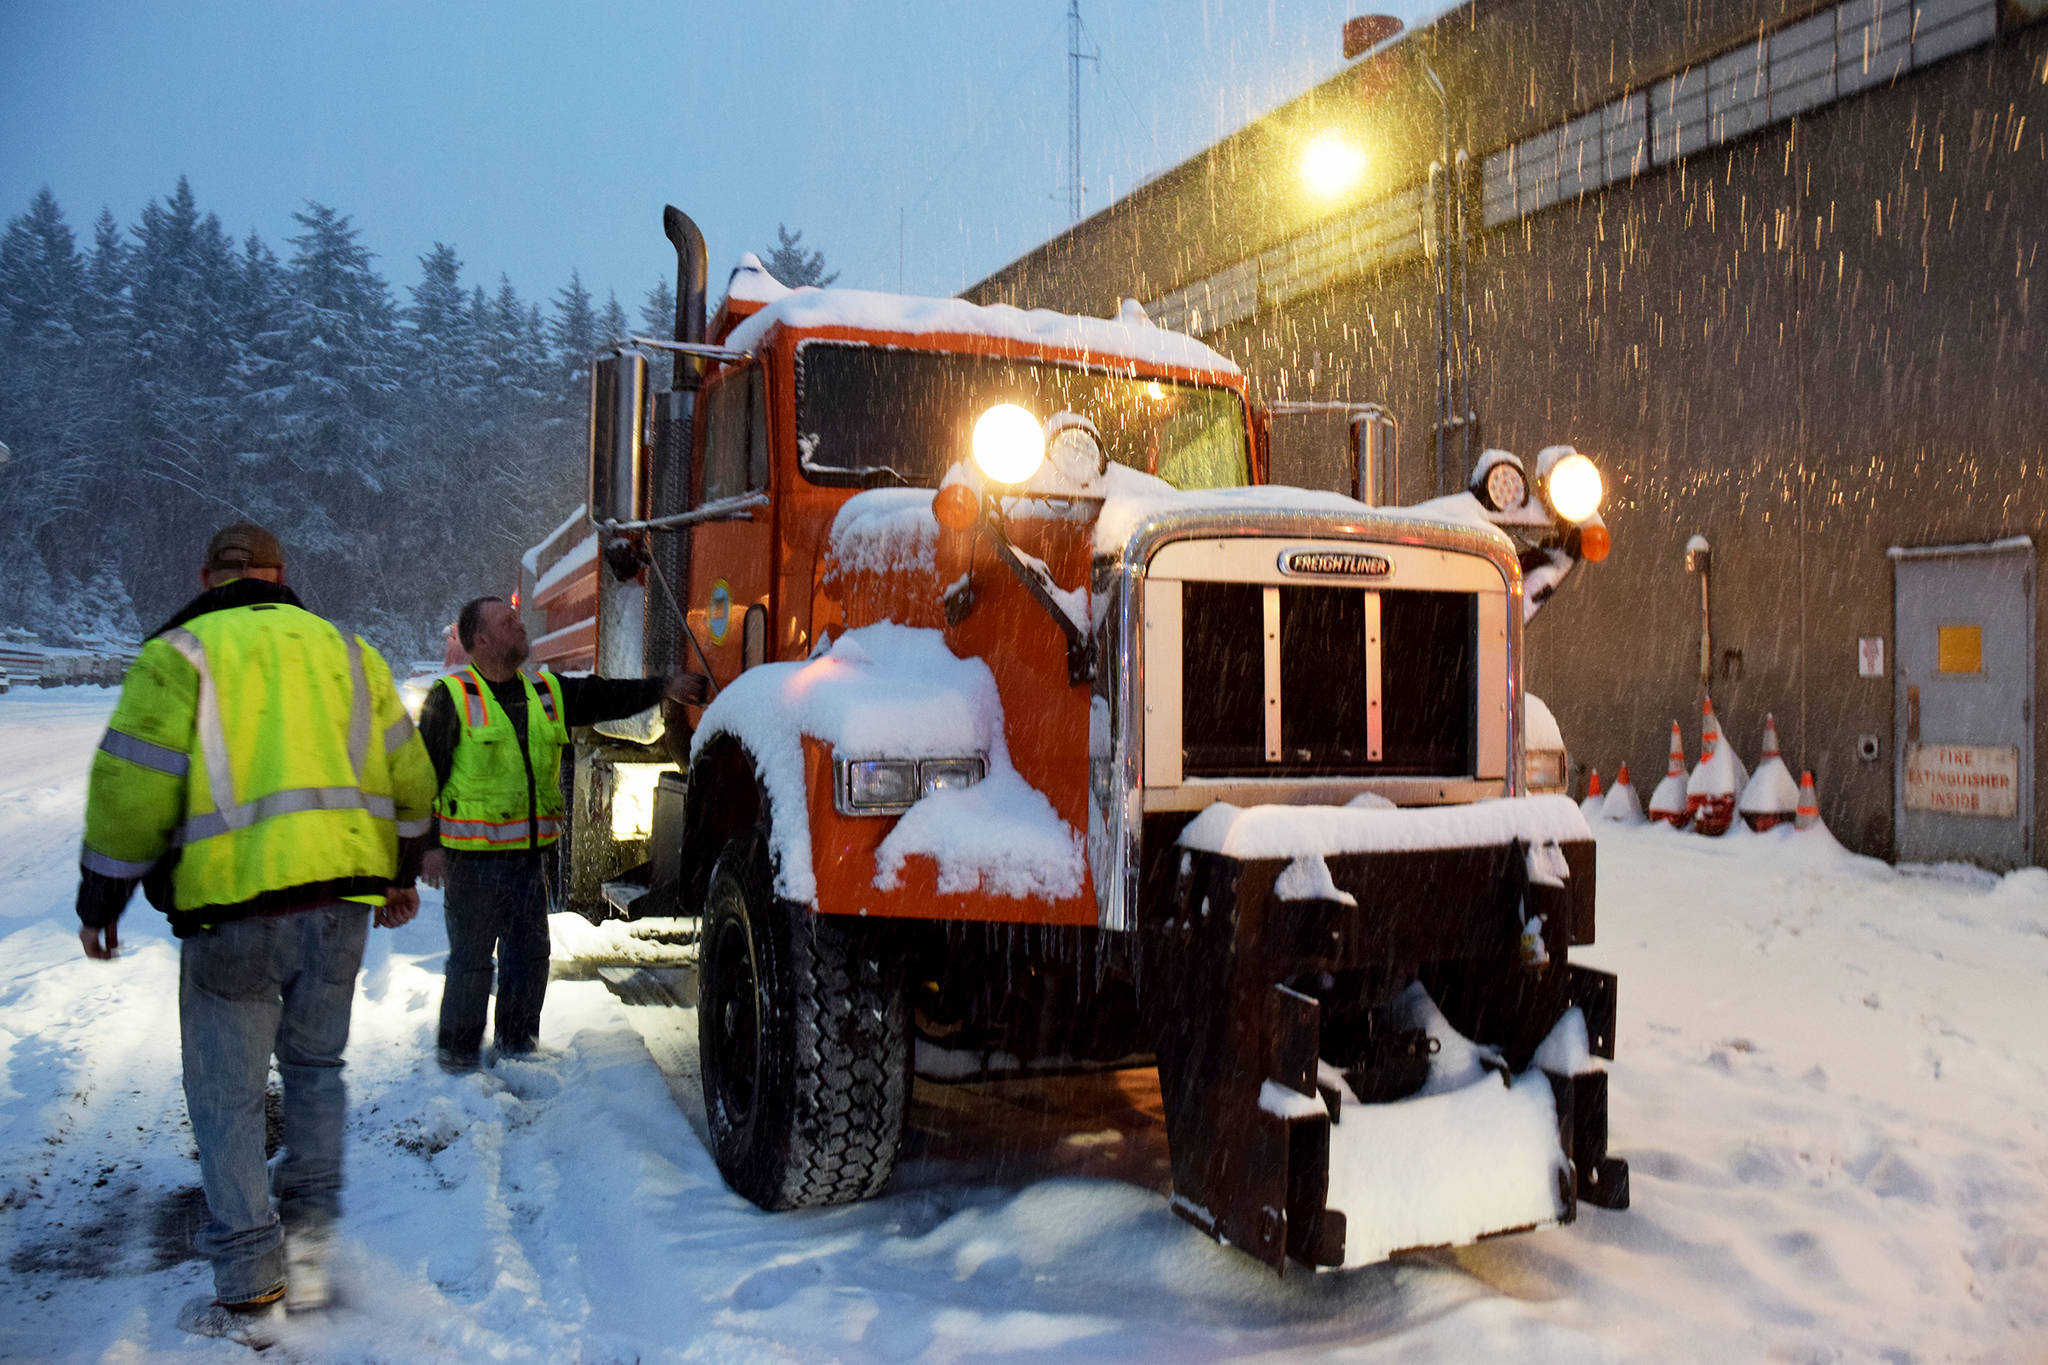 Department of Transportation workers gear up to plow the roads on Thursday Jan. 10. (Mollie Barnes | Juneau Empire)